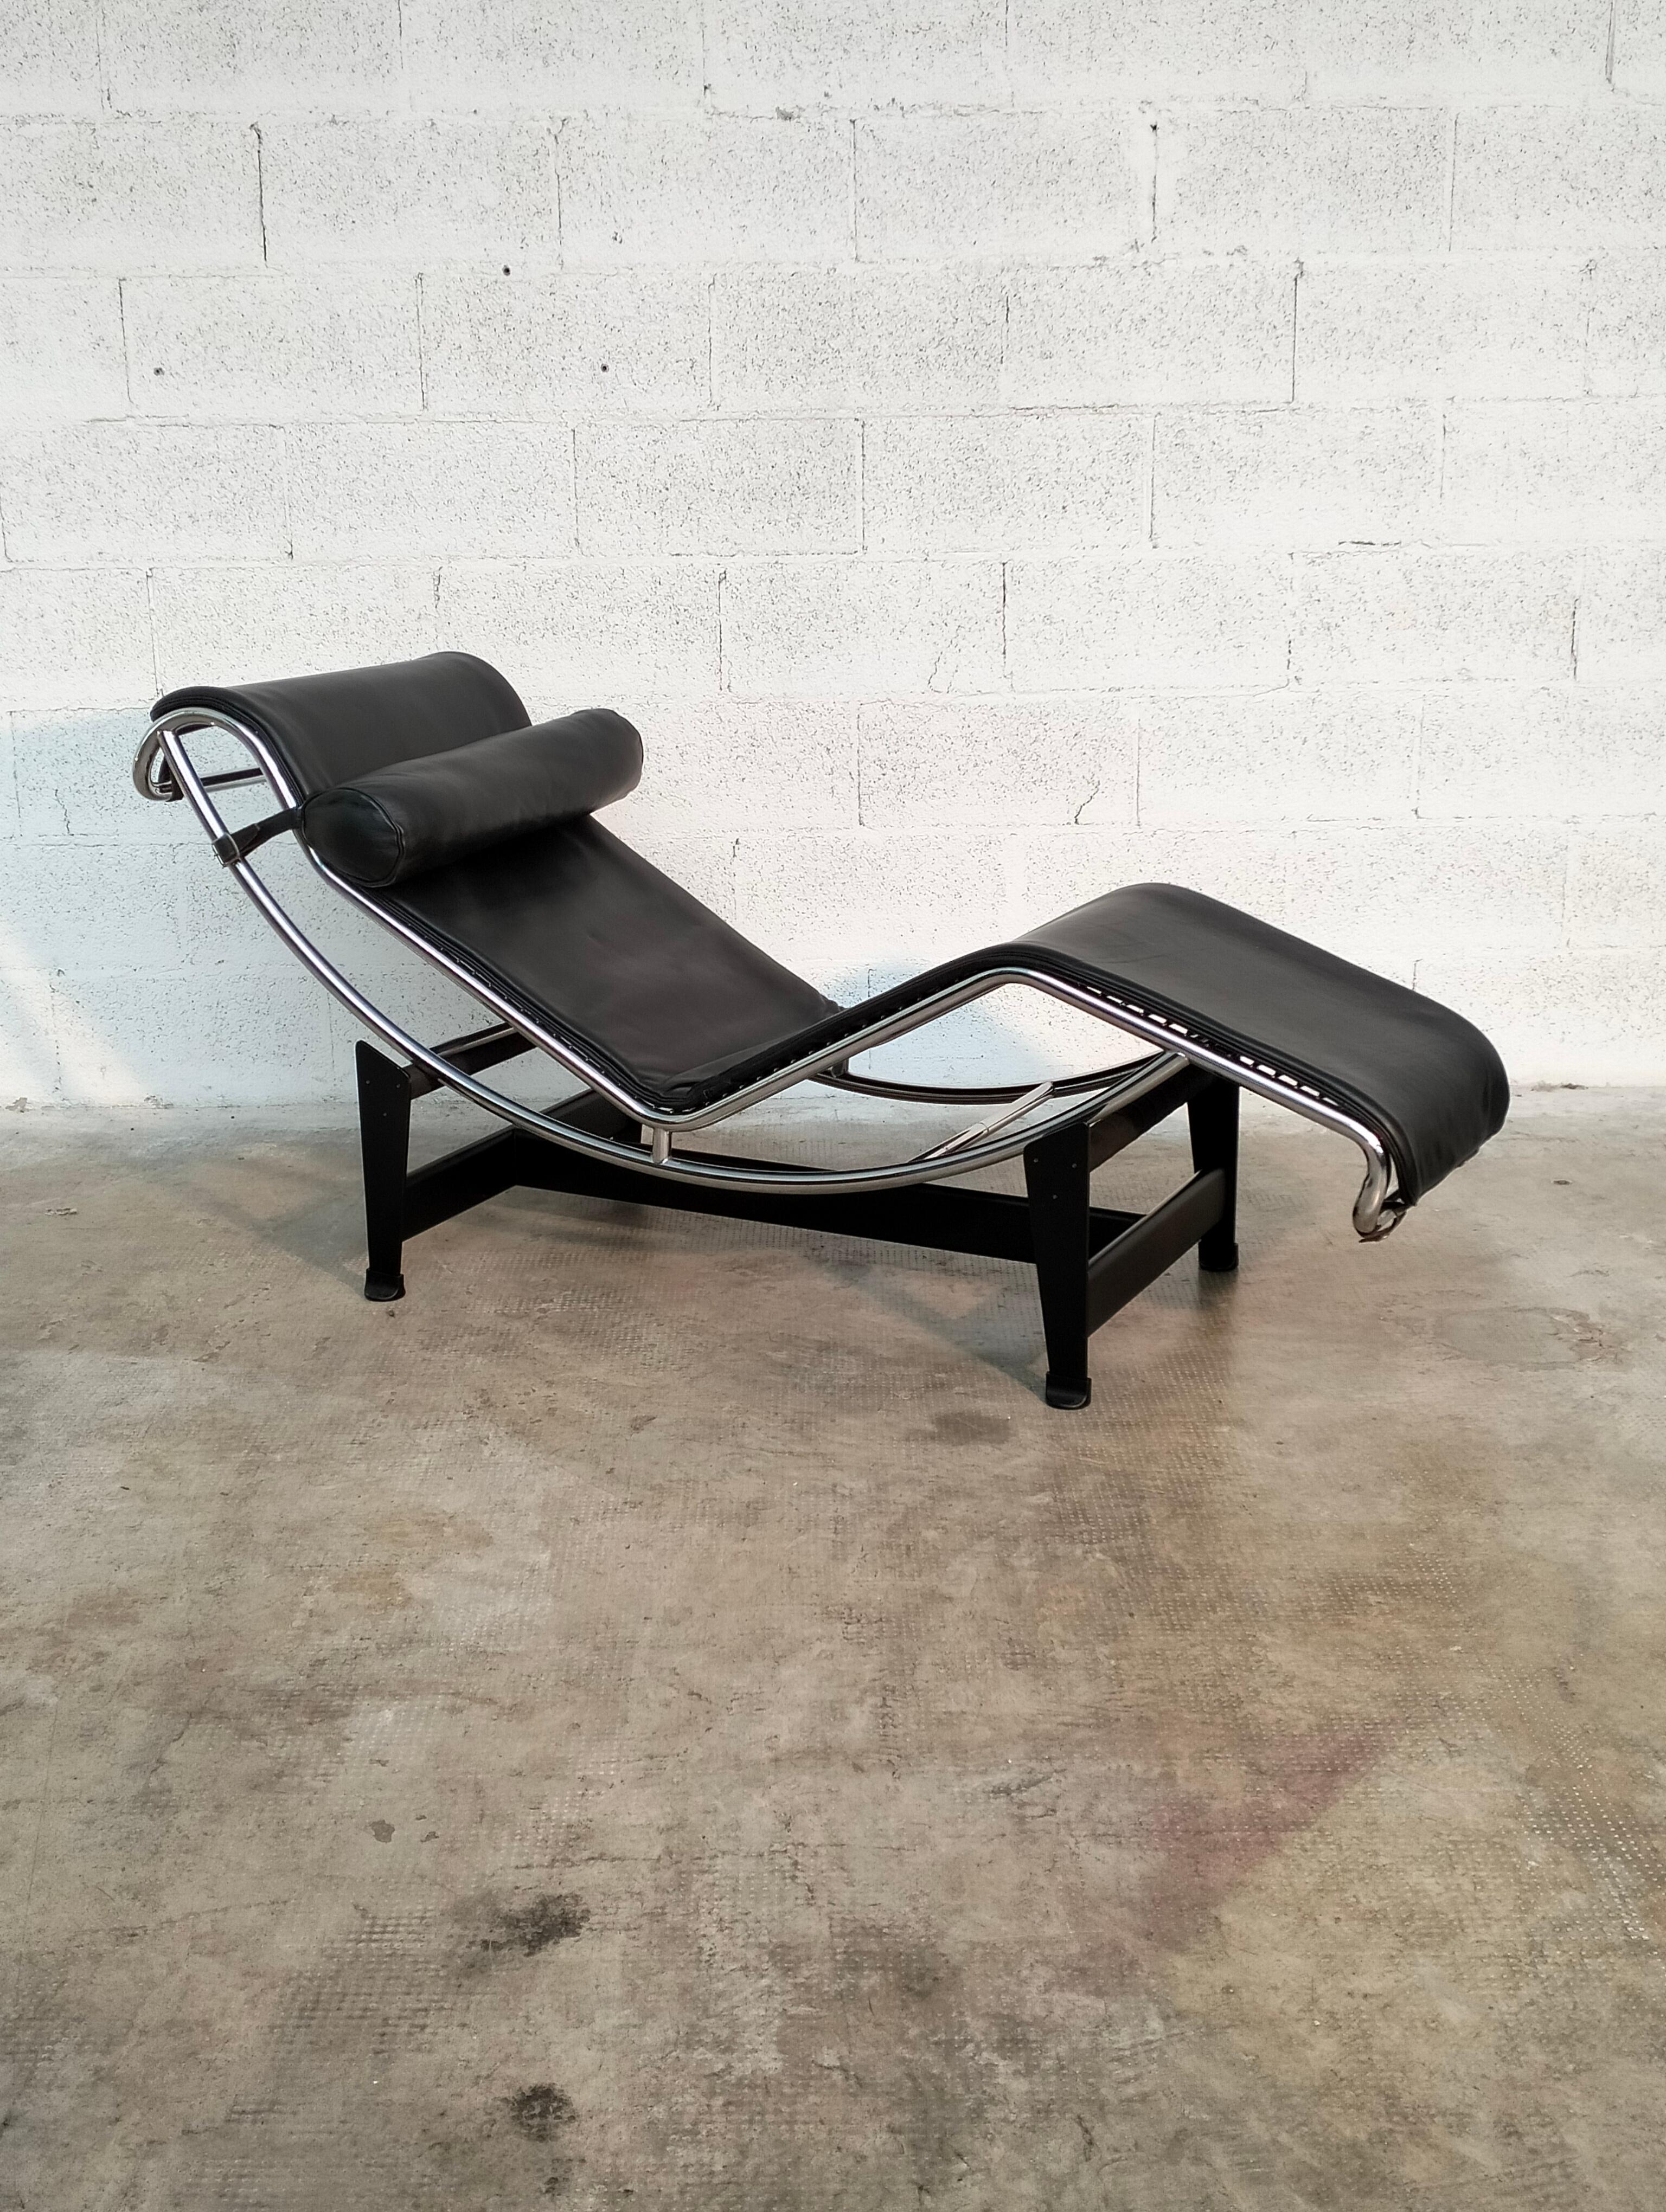 The LC4 was designed in 1928 and brought to the lime light one year later, at the Salon d'Automne in Paris. It comes from the furniture collection, which was a product of the collaboration between Le Corbusier, Charlotte Perriand and Le Corbusier’s